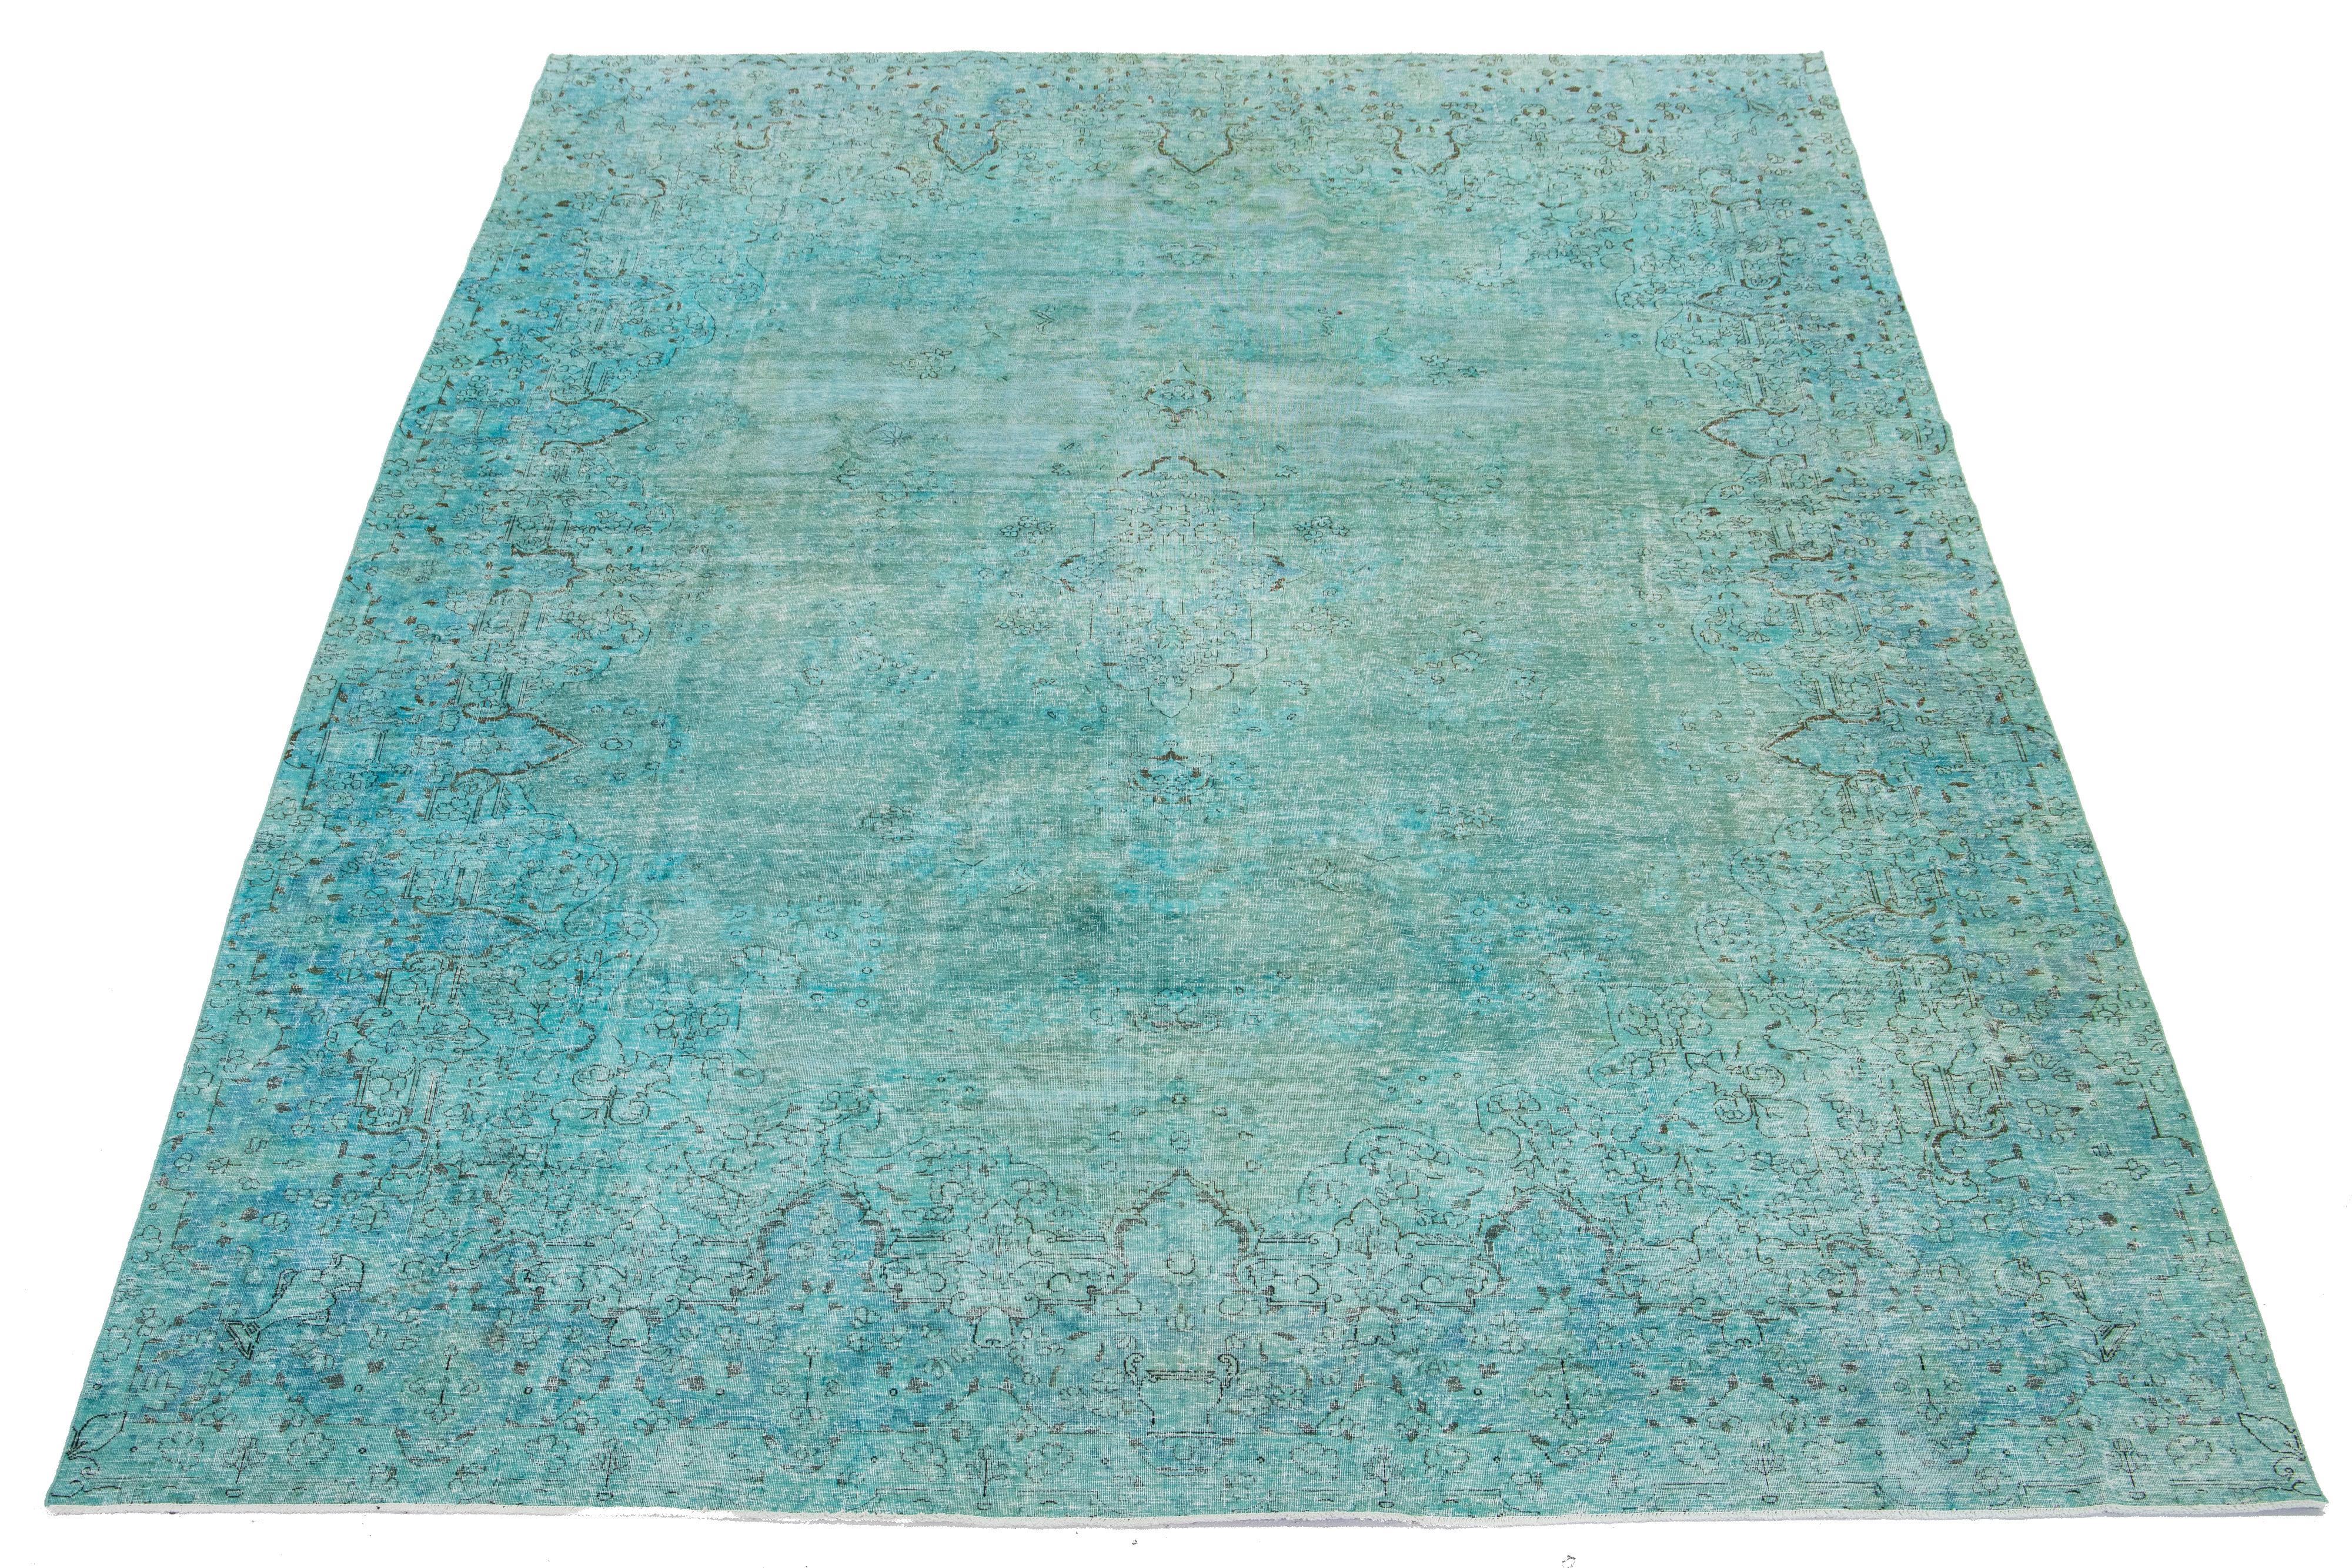 This is an antique hand-knotted wool Persian rug with a Turquoise field. It features a medallion floral design with gray accents.

This rug measures 8'9'' x 12'10